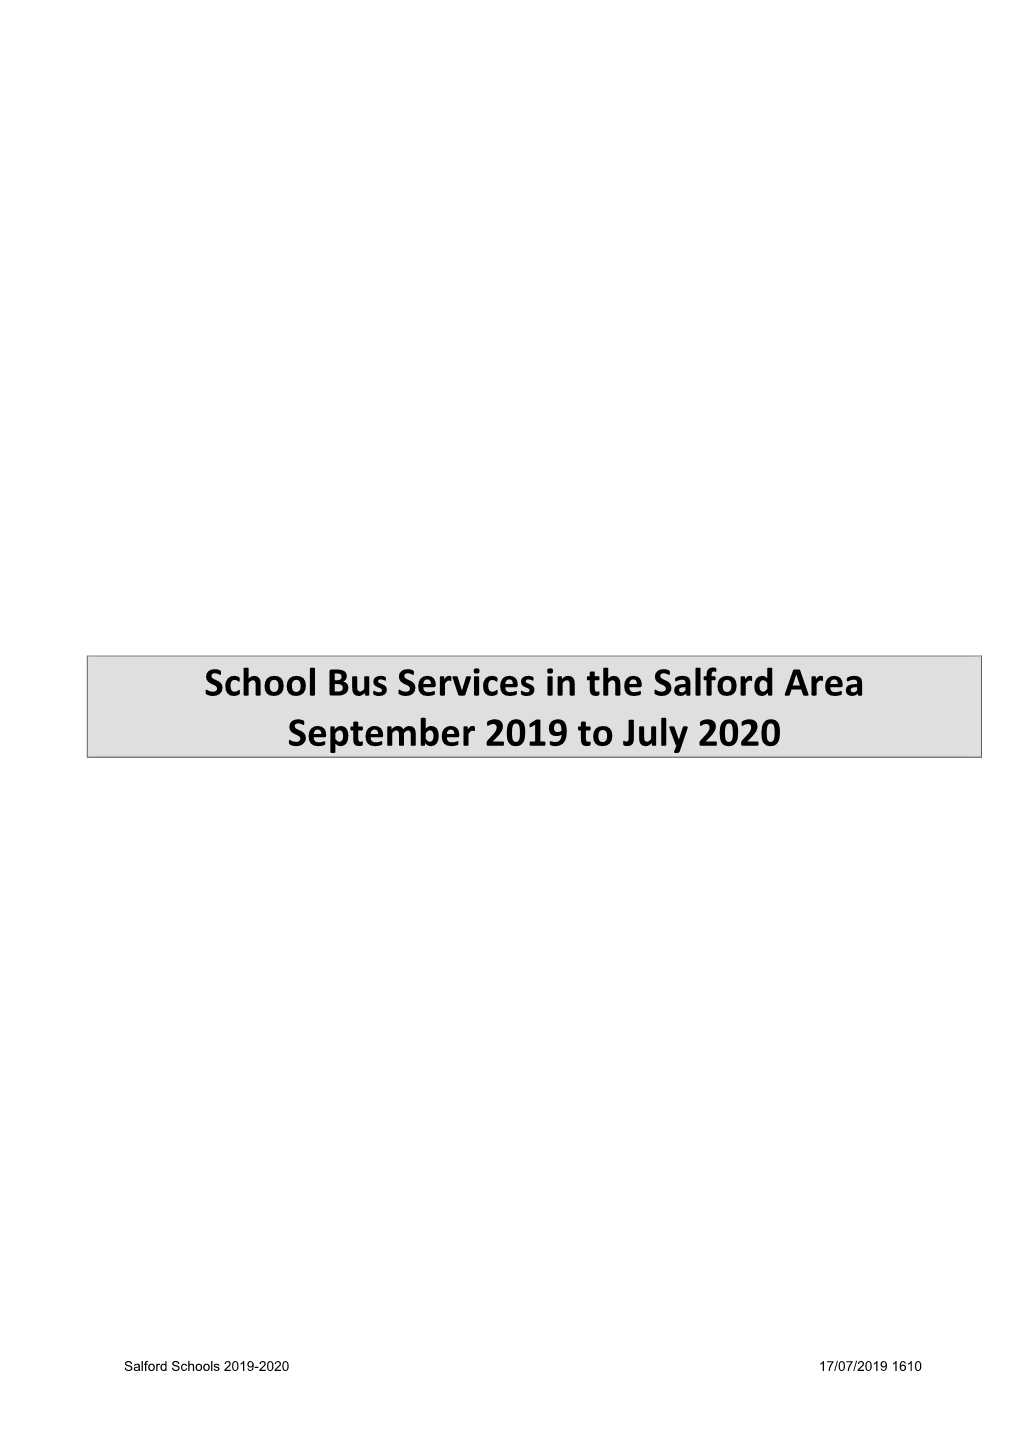 School Bus Services in the Salford Area September 2019 to July 2020